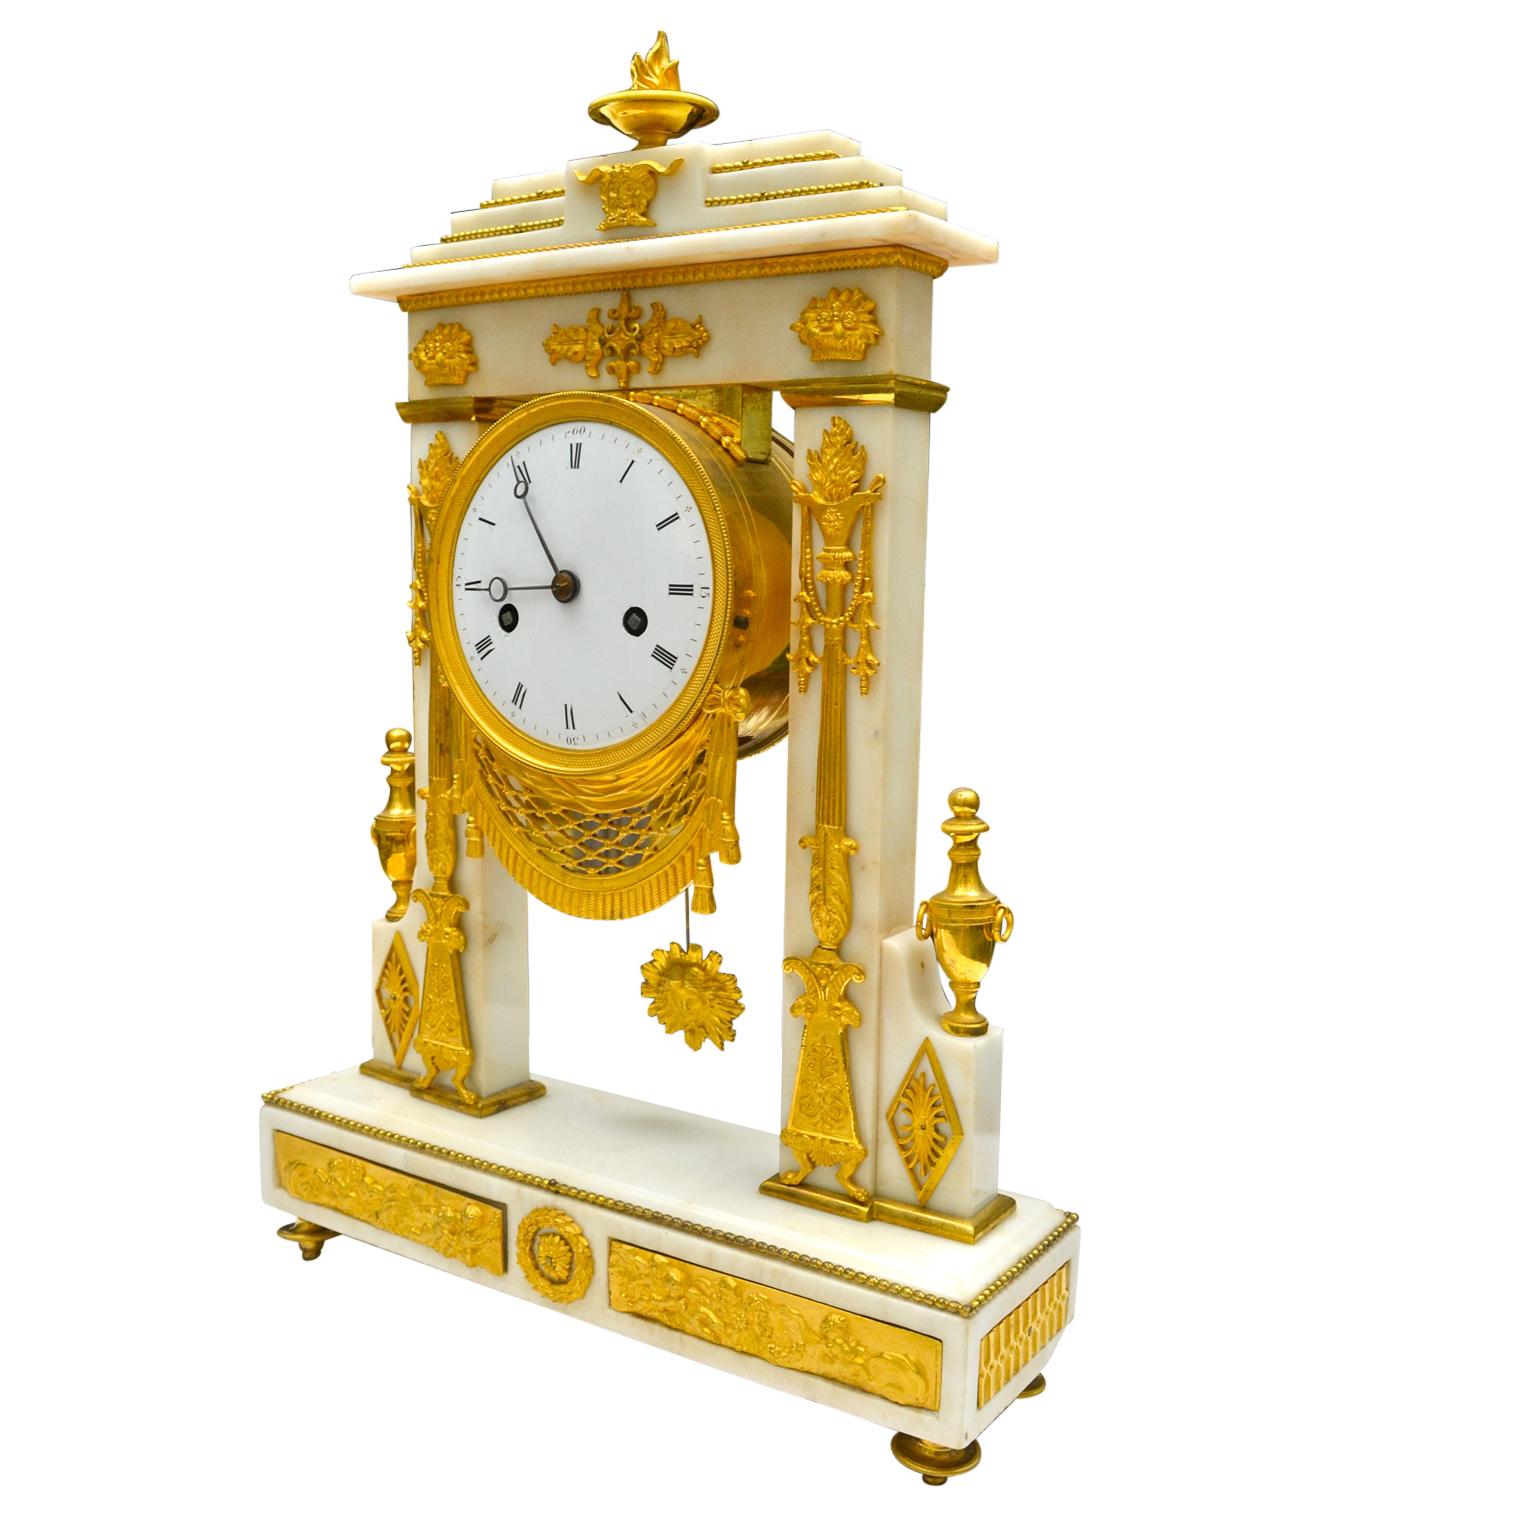 A French Empire white marble and gilt bronze portico clock in the form of a triumphal arch; very high quality chased bronze mounts have their original fire gilding. The front pillars are decorated with Roman 'lamp' standards with gilded flames, the